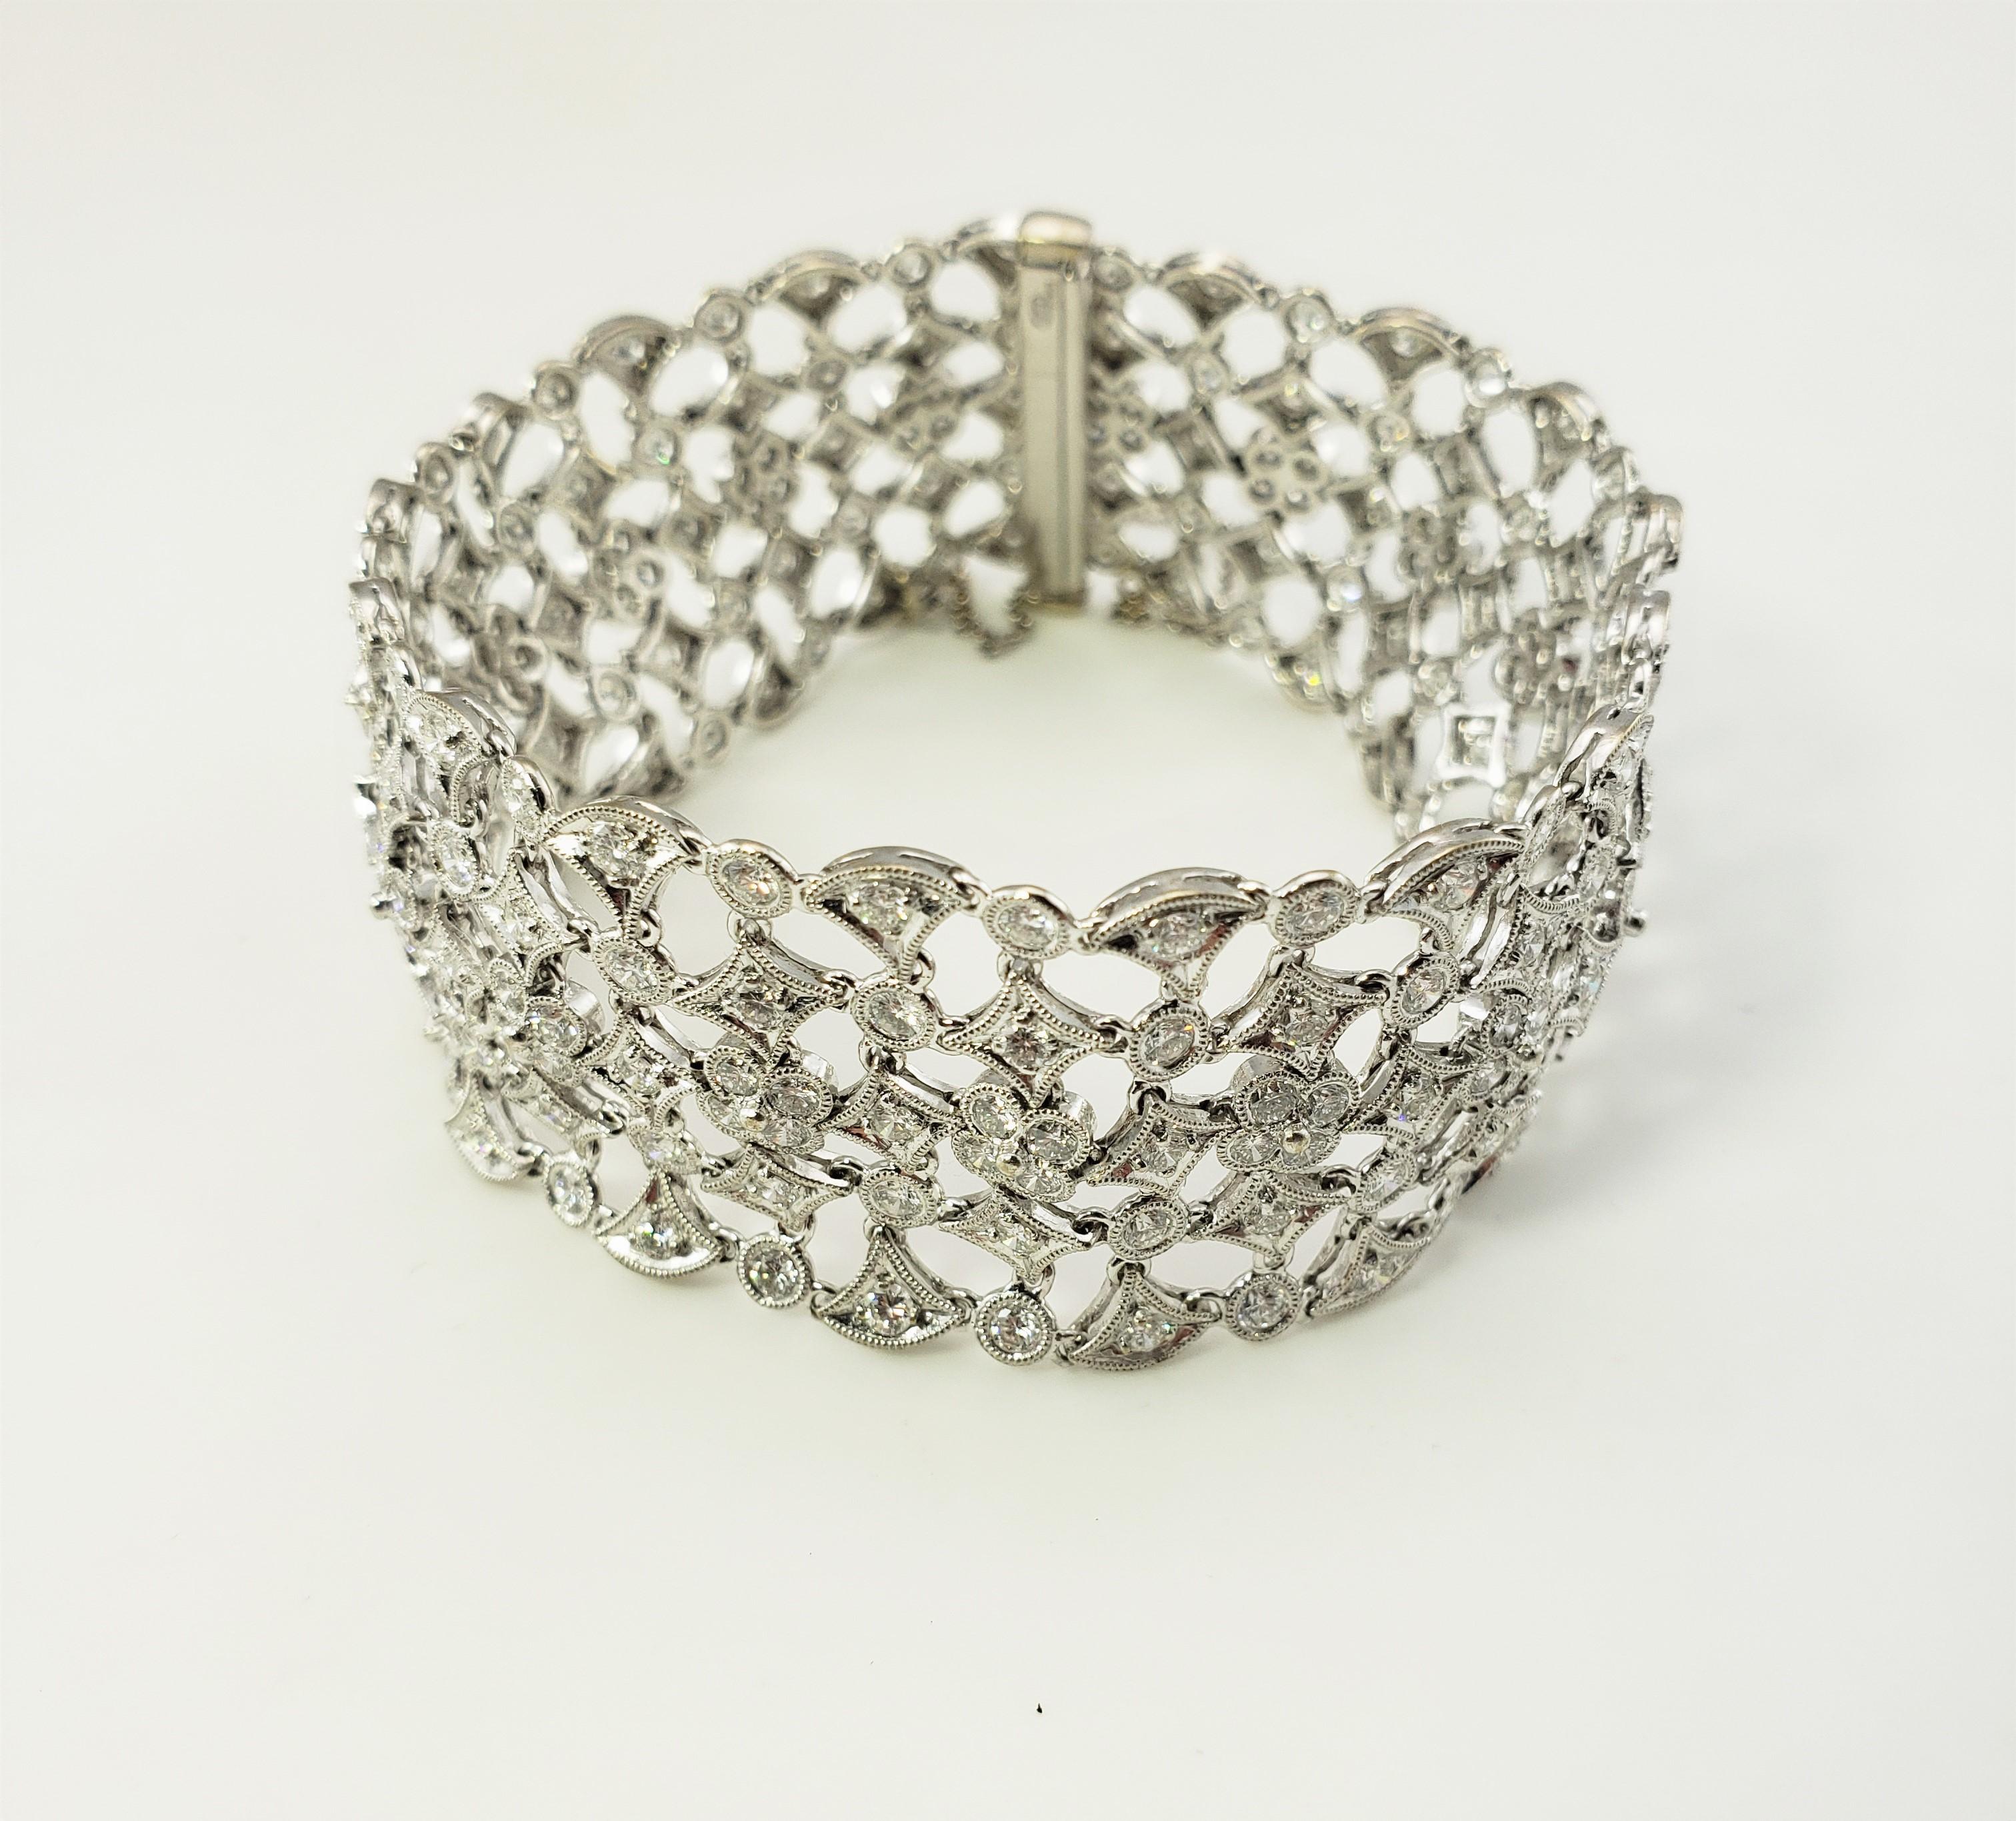 18 Karat White Gold and Diamond Bracelet-

This spectacular 18K white gold bracelet features 221 round brilliant cut diamond set in an exquisite open design.  Width:  24 mm.

Approximate total diamond weight:  4 cts.
Diamond color:  G

Diamond